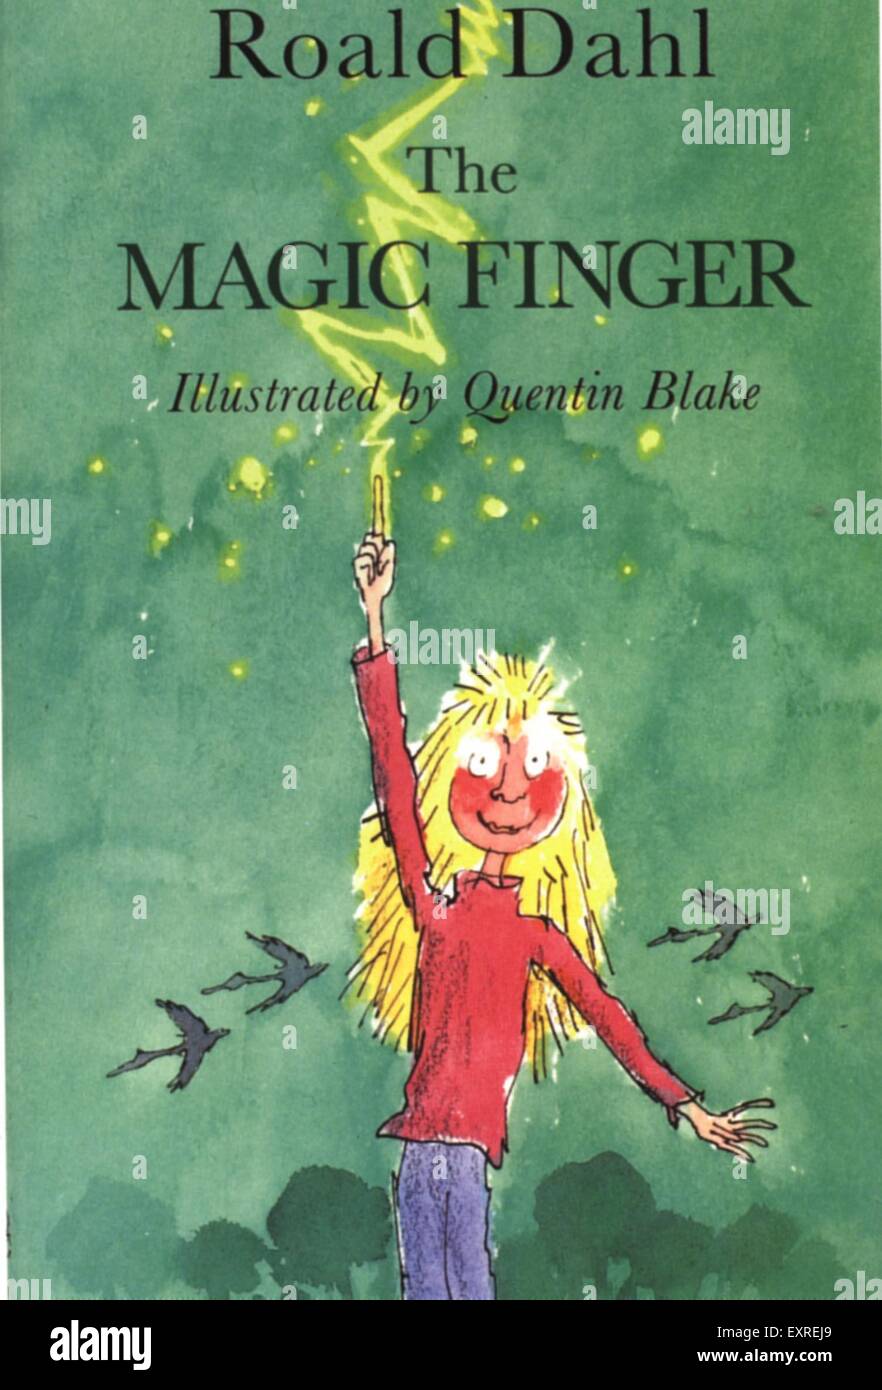 1980s UK The Magic Finger by Roald Dahl Book Cover Stock Photo